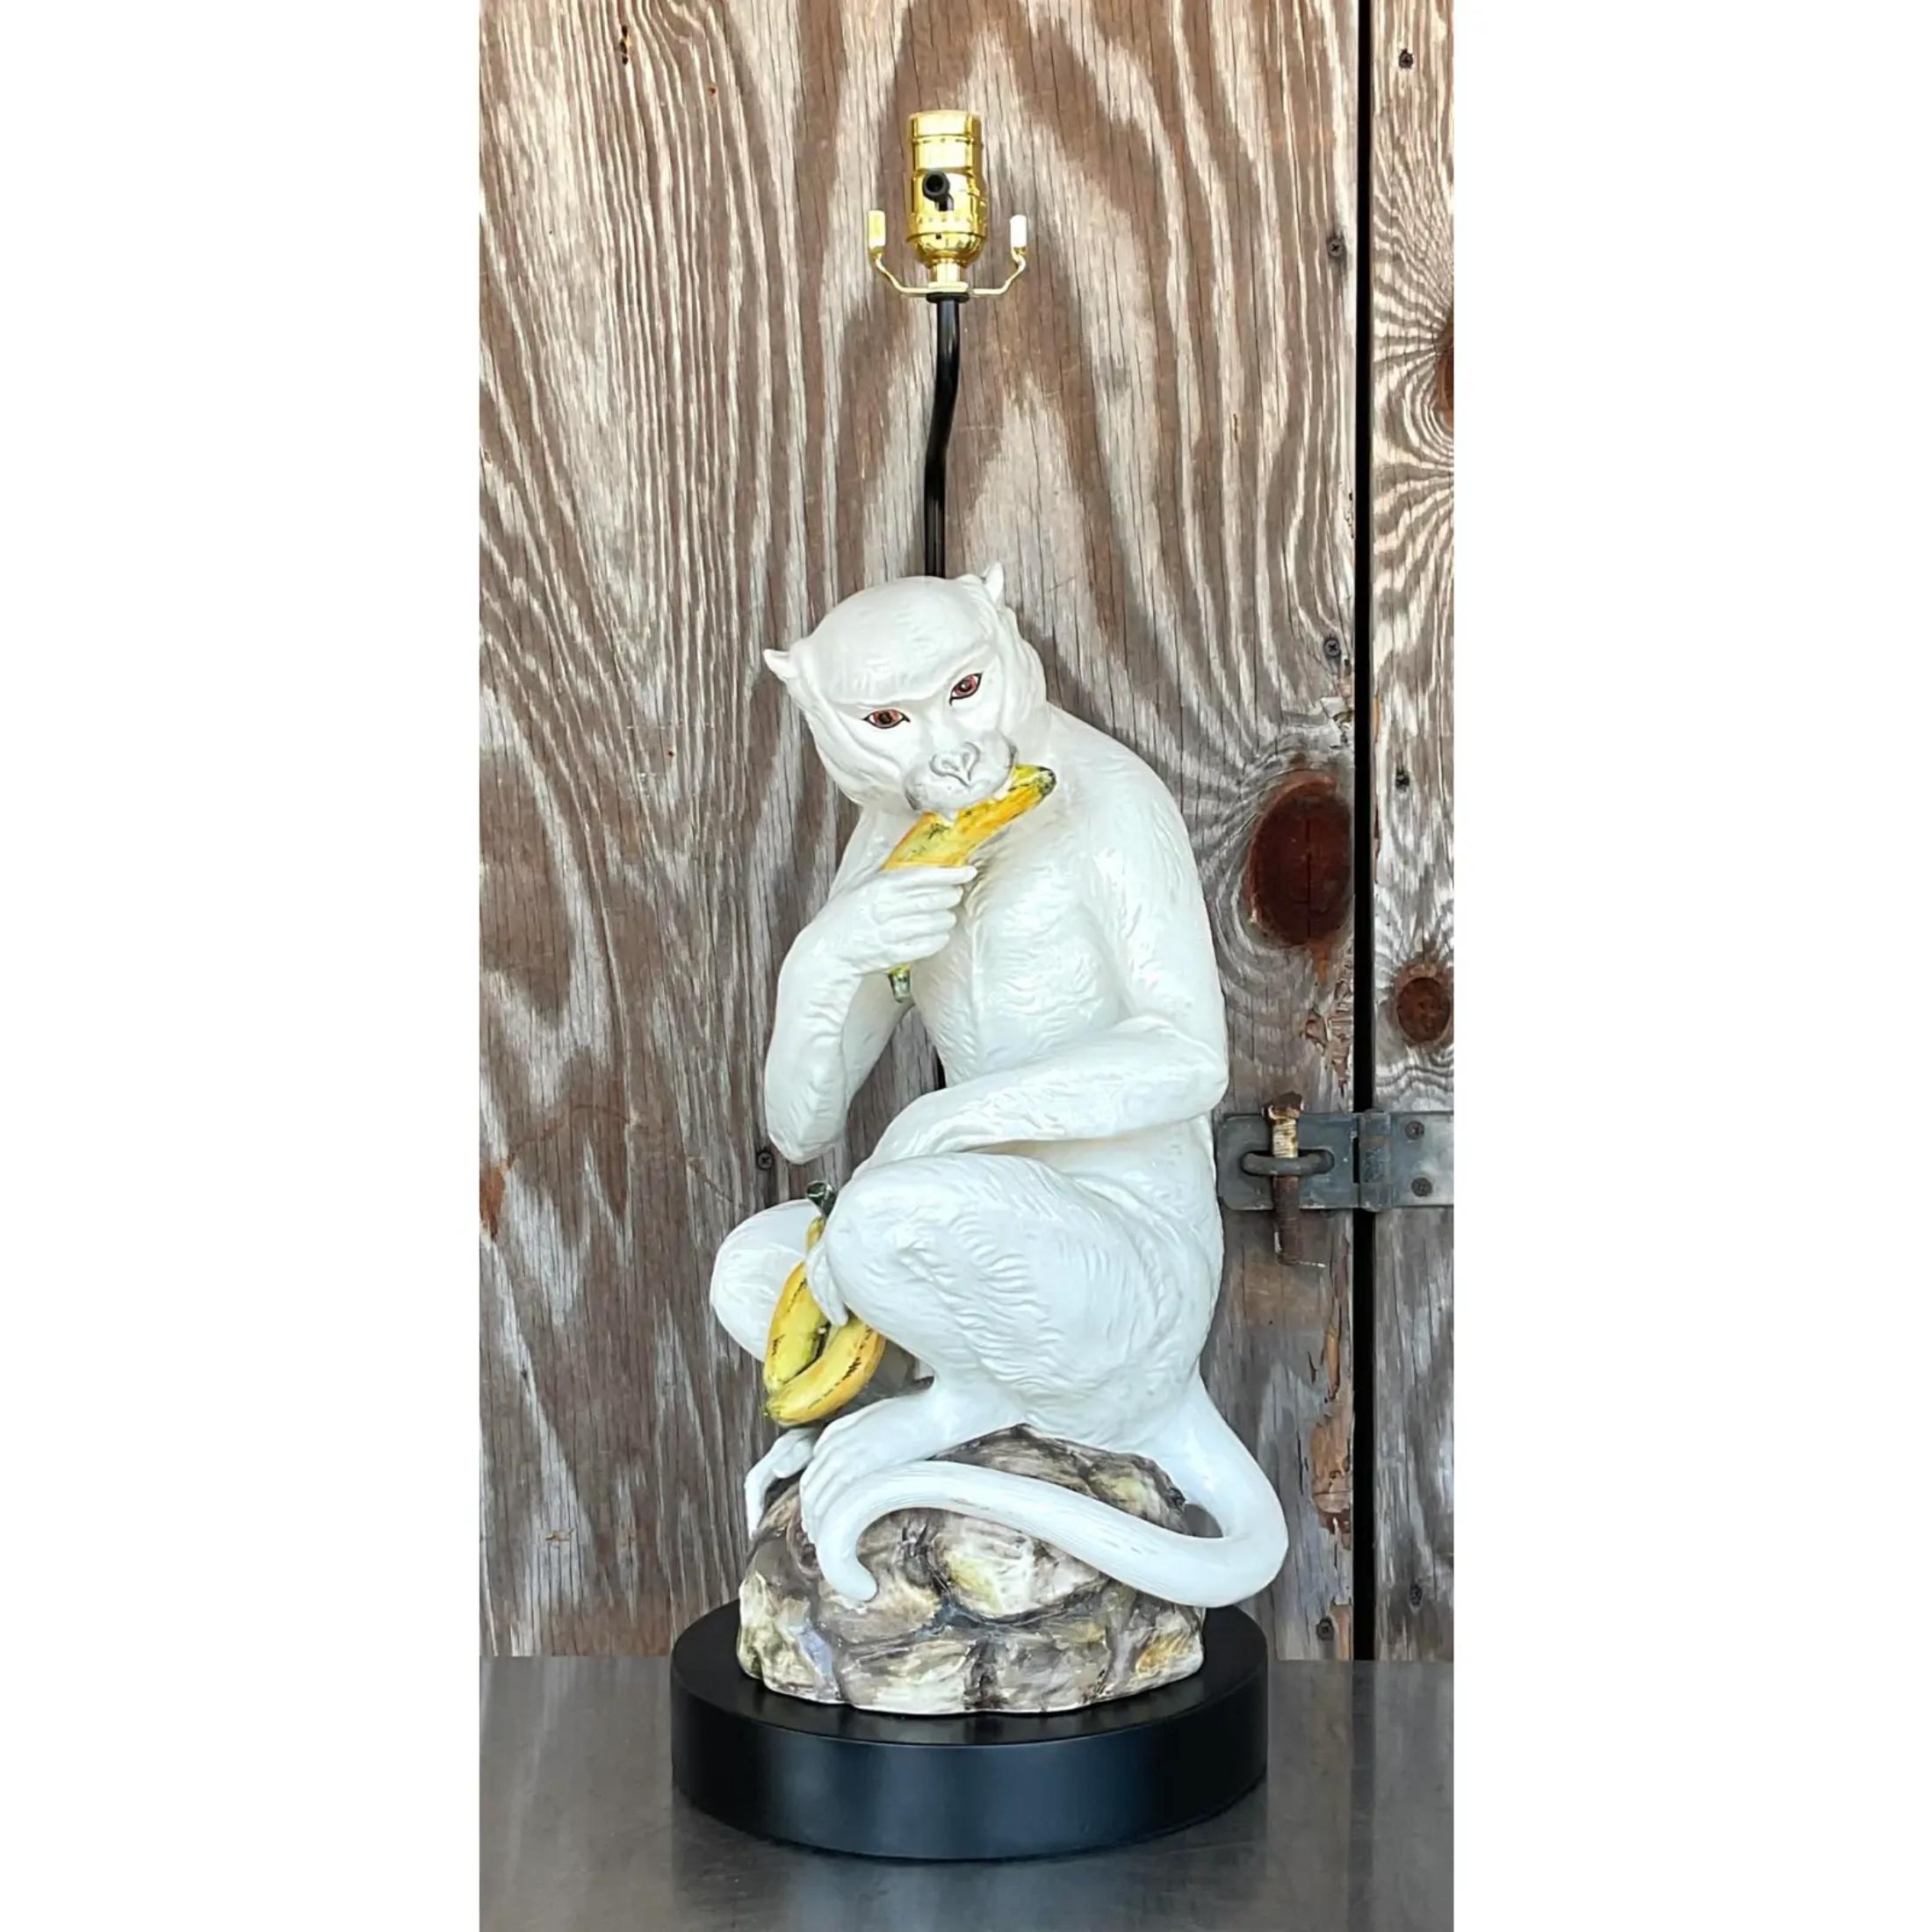 Vintage Coastal Italian Glazed Ceramic Monkey Lamp For Sale - Image 4 of 6Mid 20 In Good Condition In west palm beach, FL